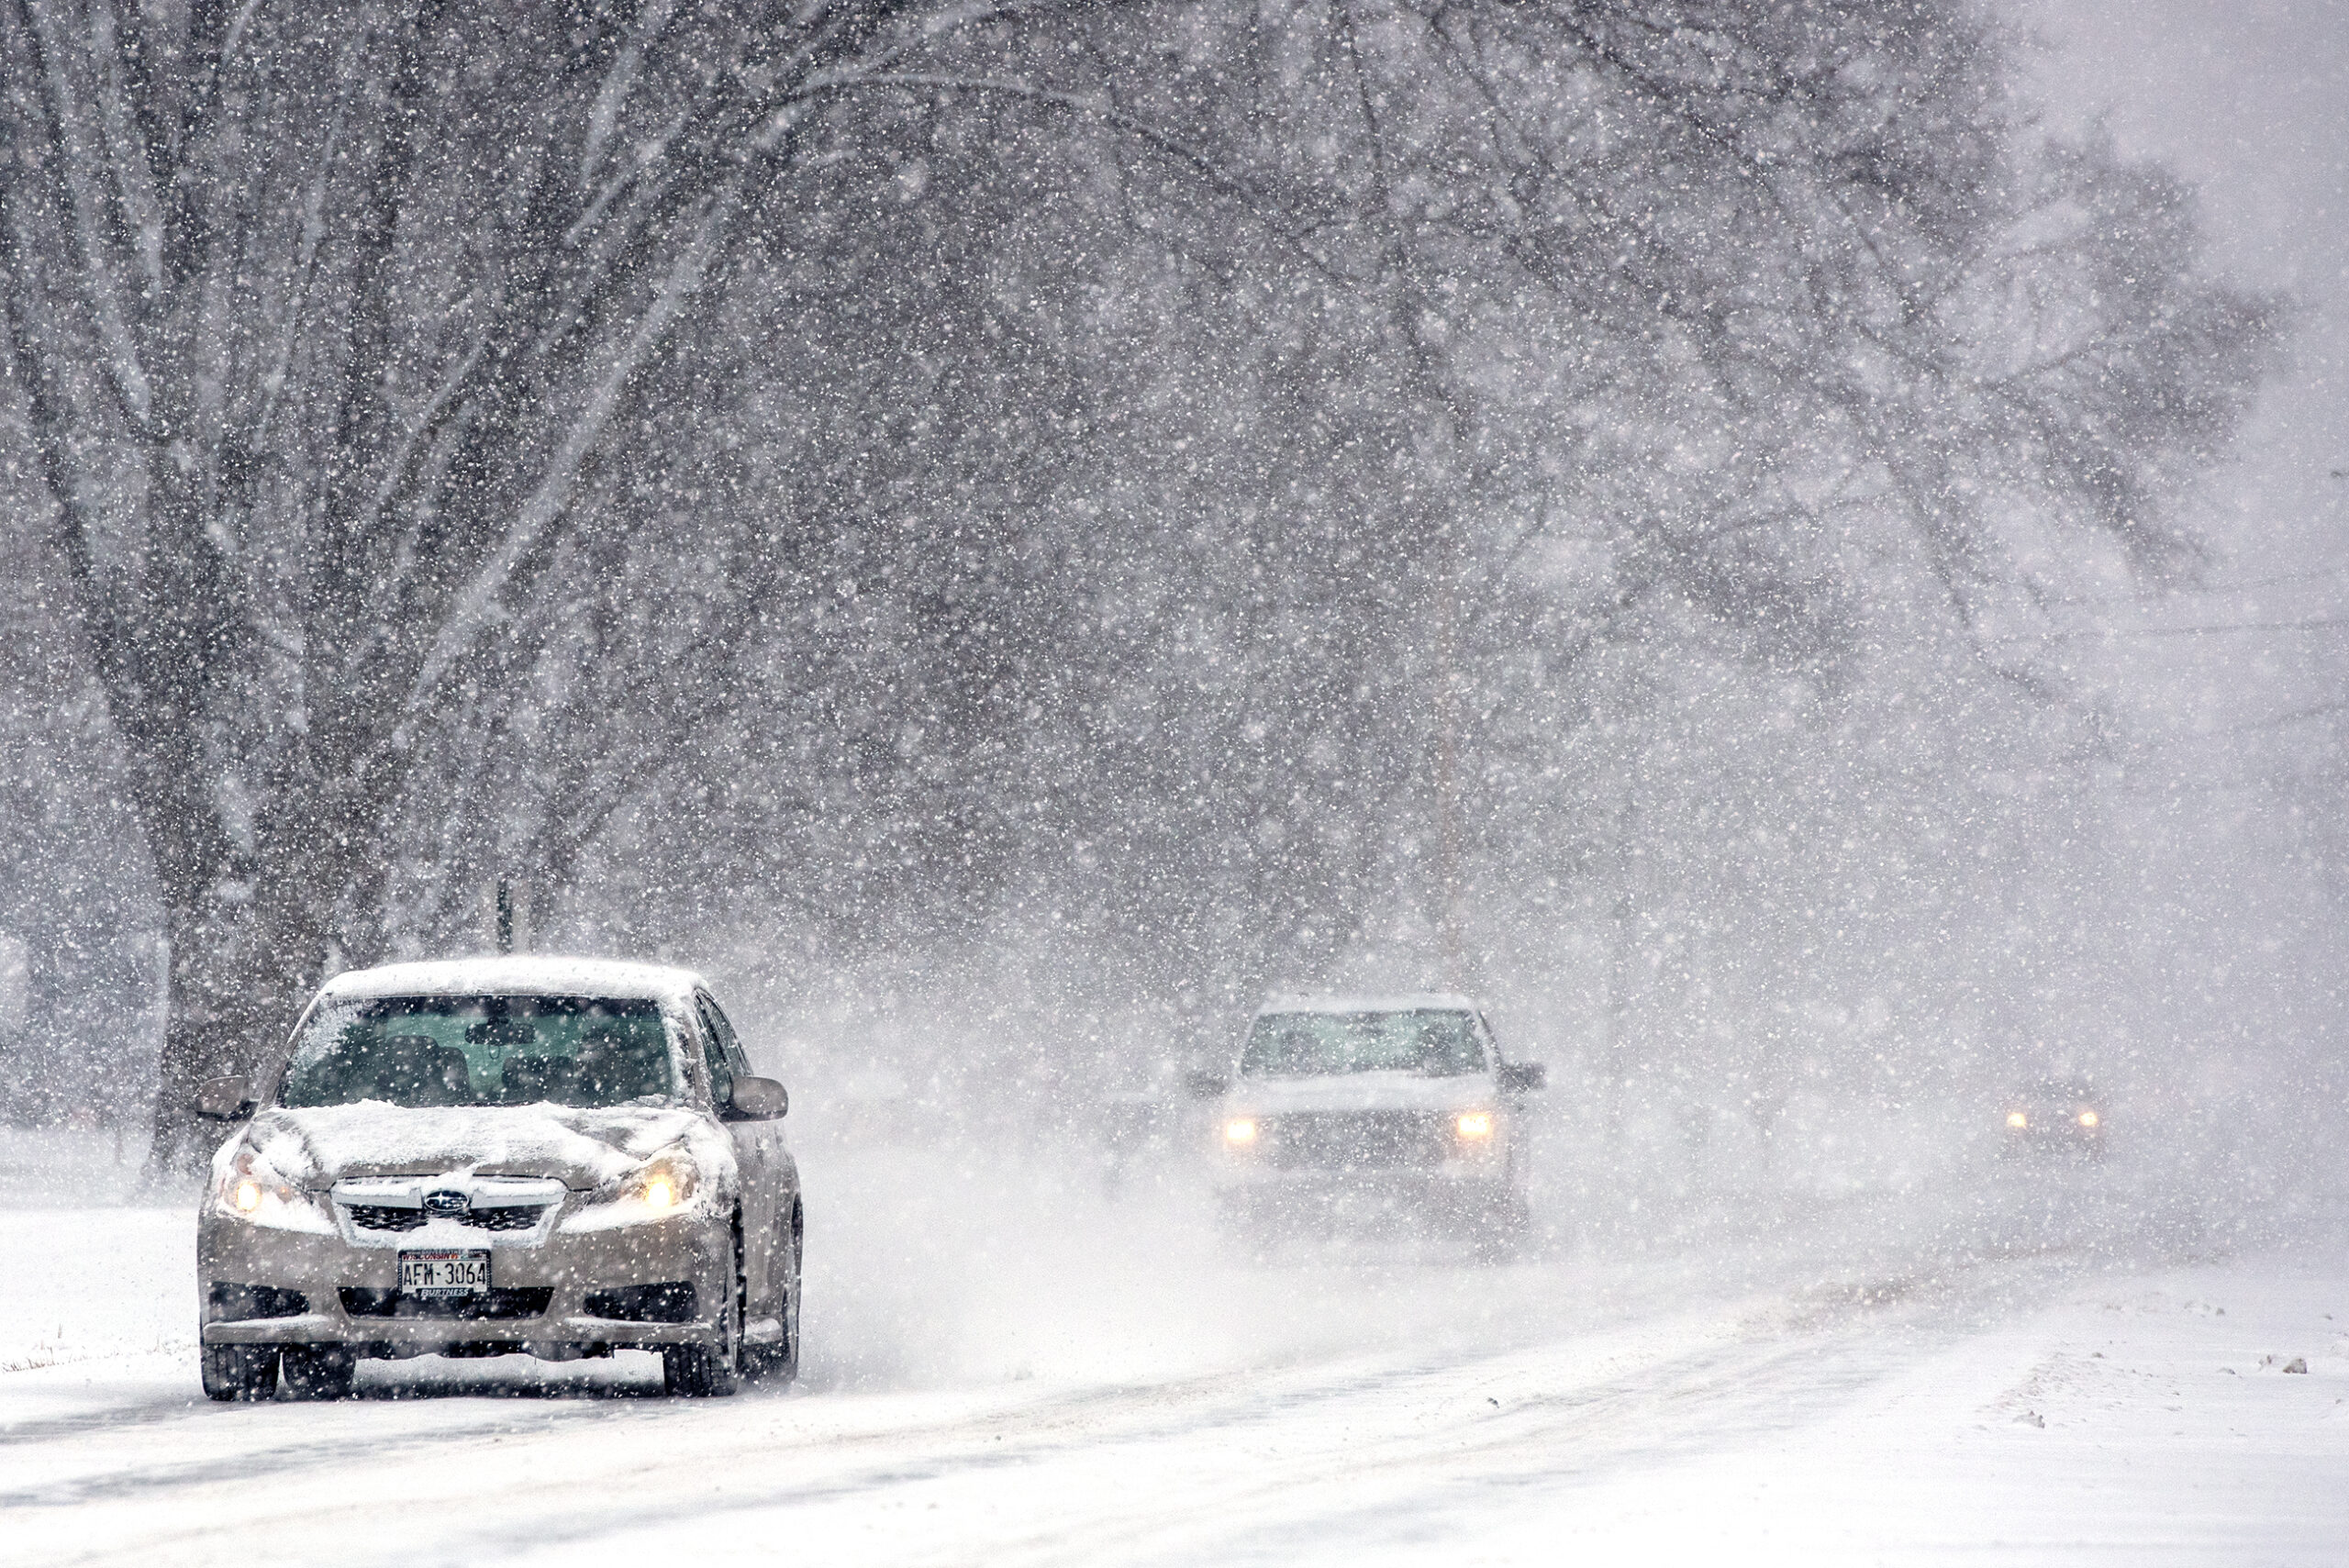 Three vehicles drive on a snow covered road during snowy conditions. The two cars in the distance can hardly be seen.